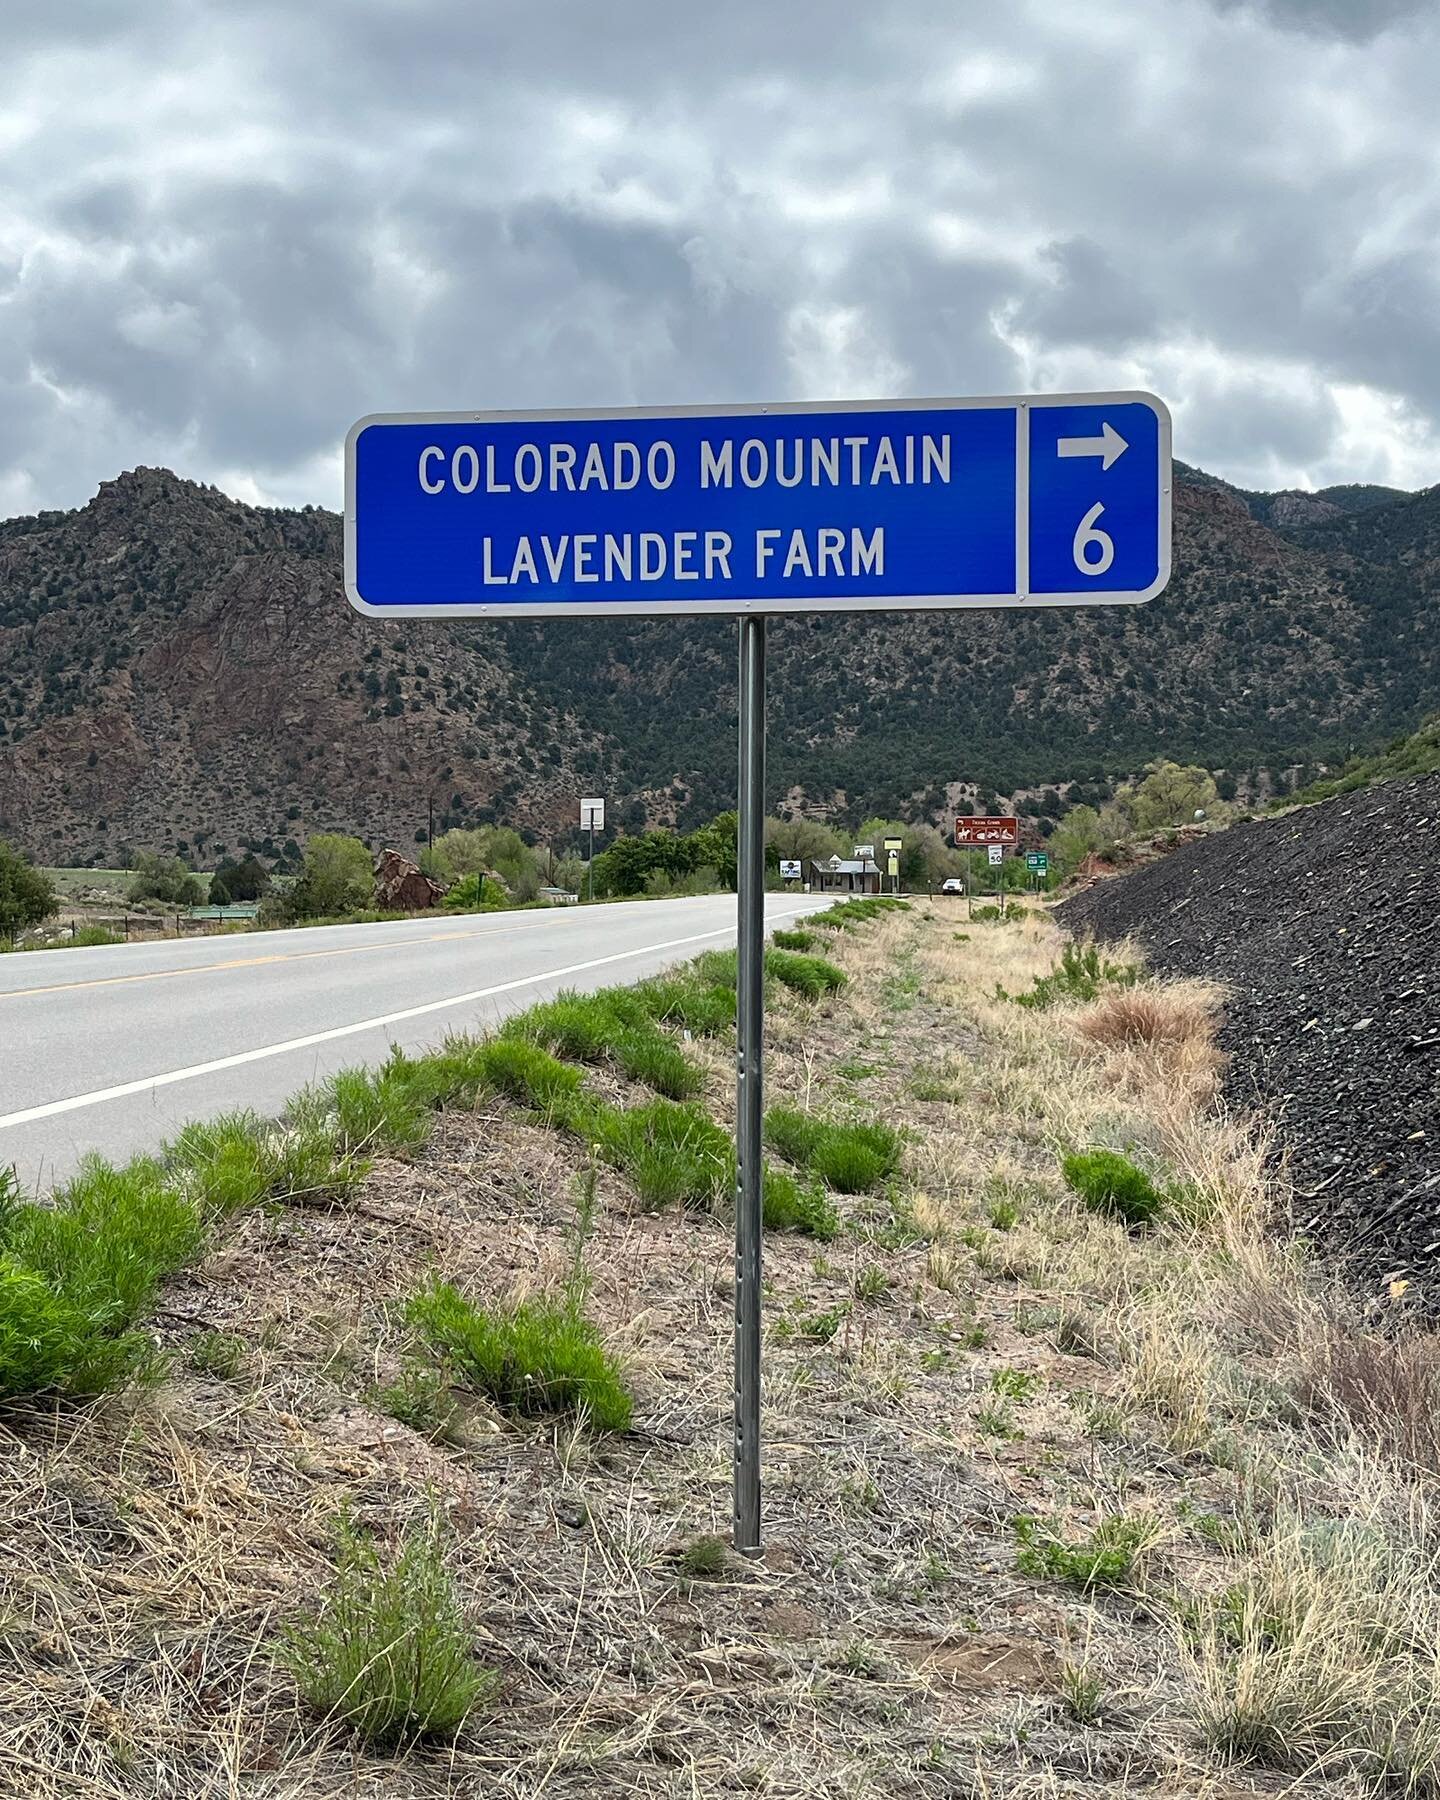 We were never hard to find but it just got easier. If you&rsquo;re traveling Hwy 50 in the Bighorn Sheep Canyon, just follow the purple signs!

Thurs thru Mon&rsquo;s starting this week all summer long. Can&rsquo;t wait to meet you!
#lavenderfarm #co